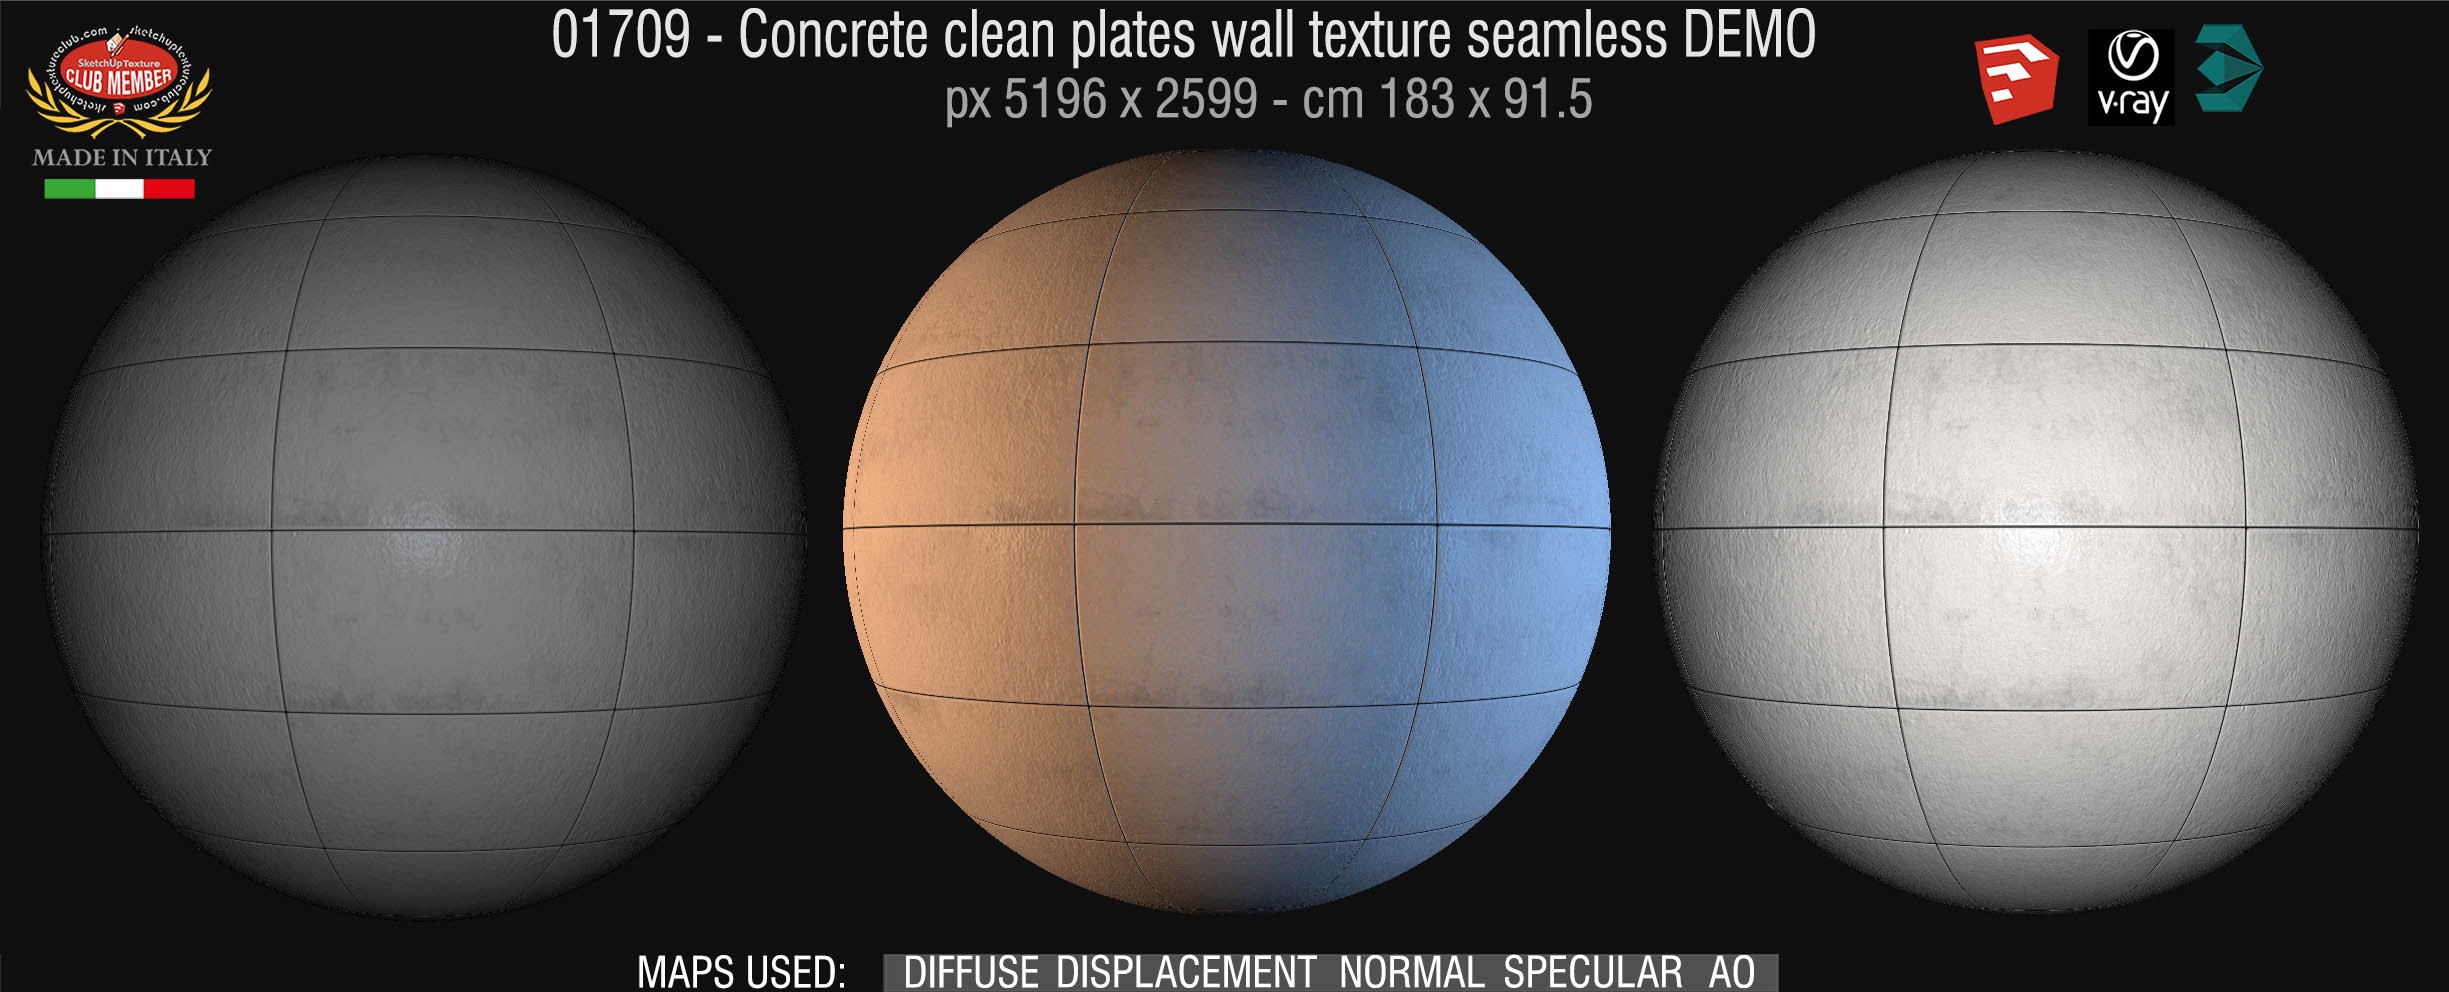 0179 Concrete clean plates wall texture seamless + maps DEMO